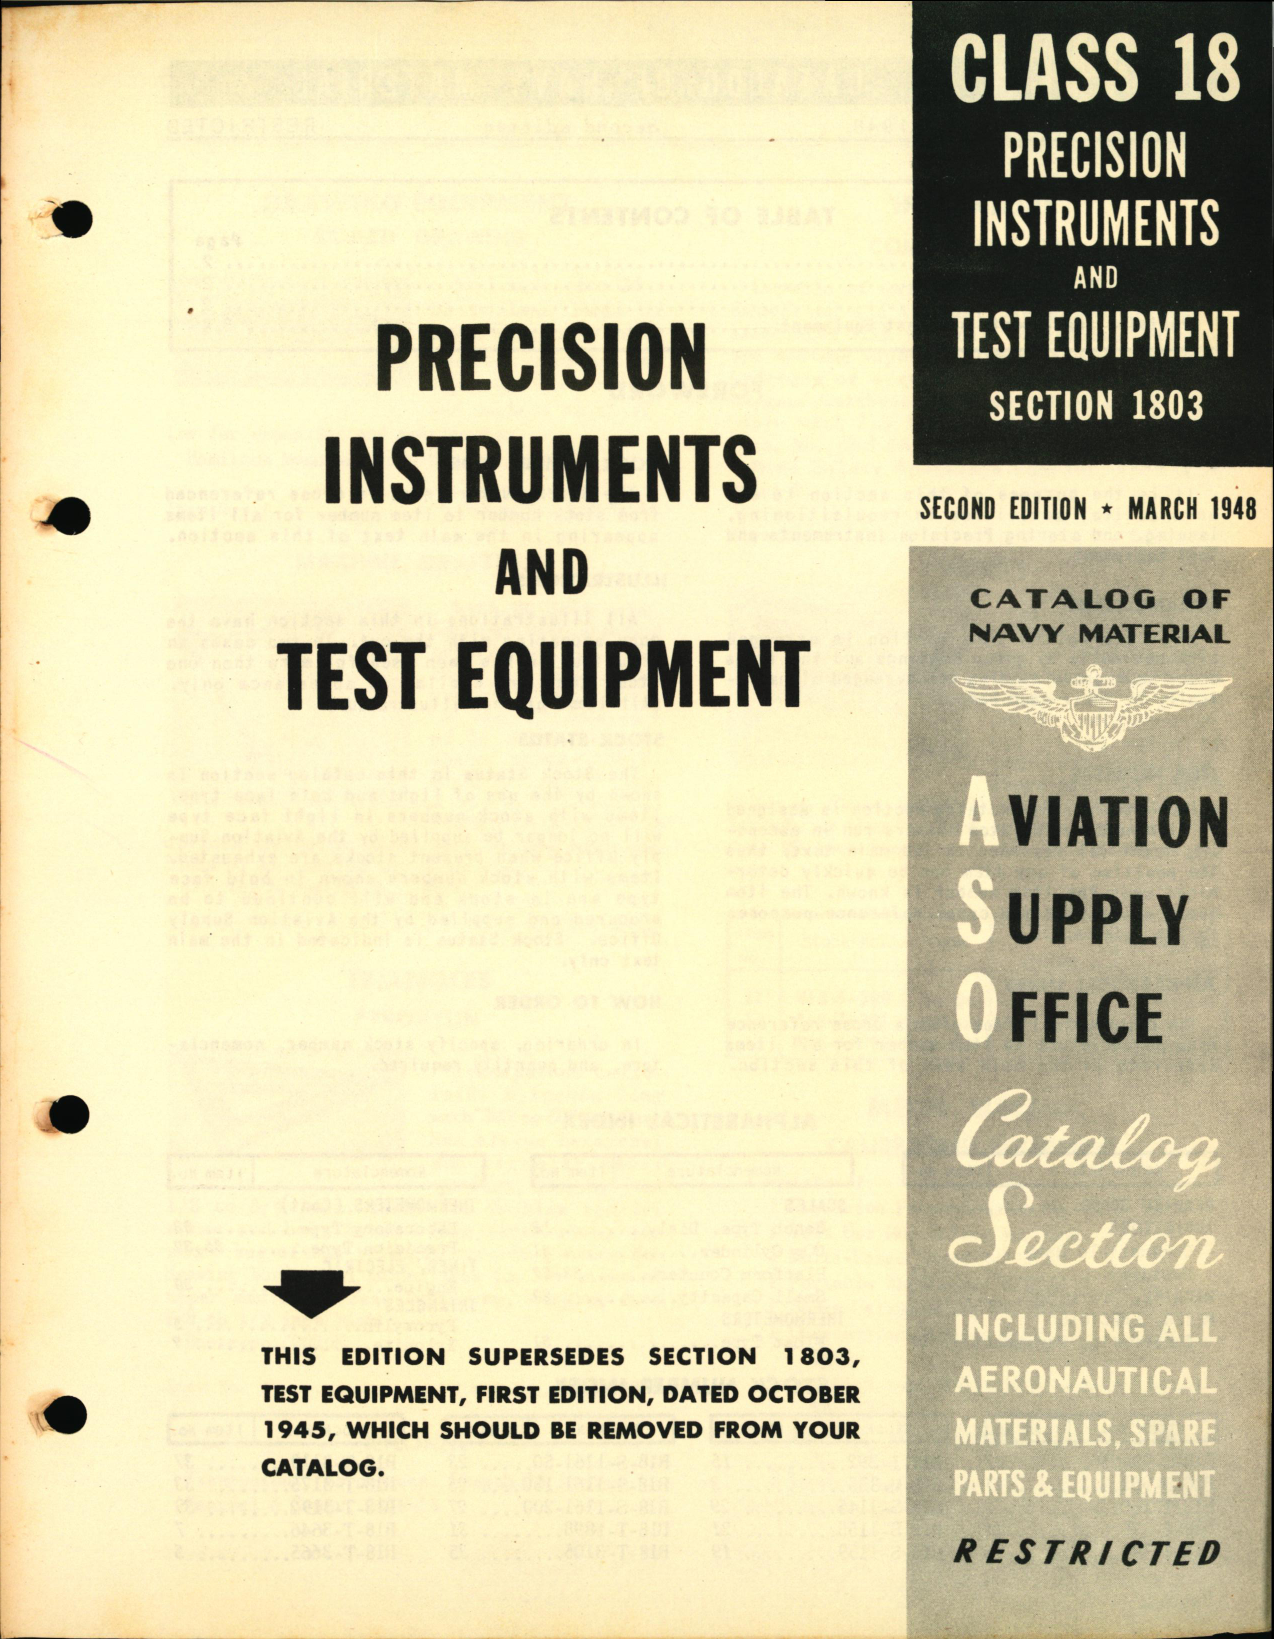 Sample page 1 from AirCorps Library document: Precision Instruments and Test Equipment